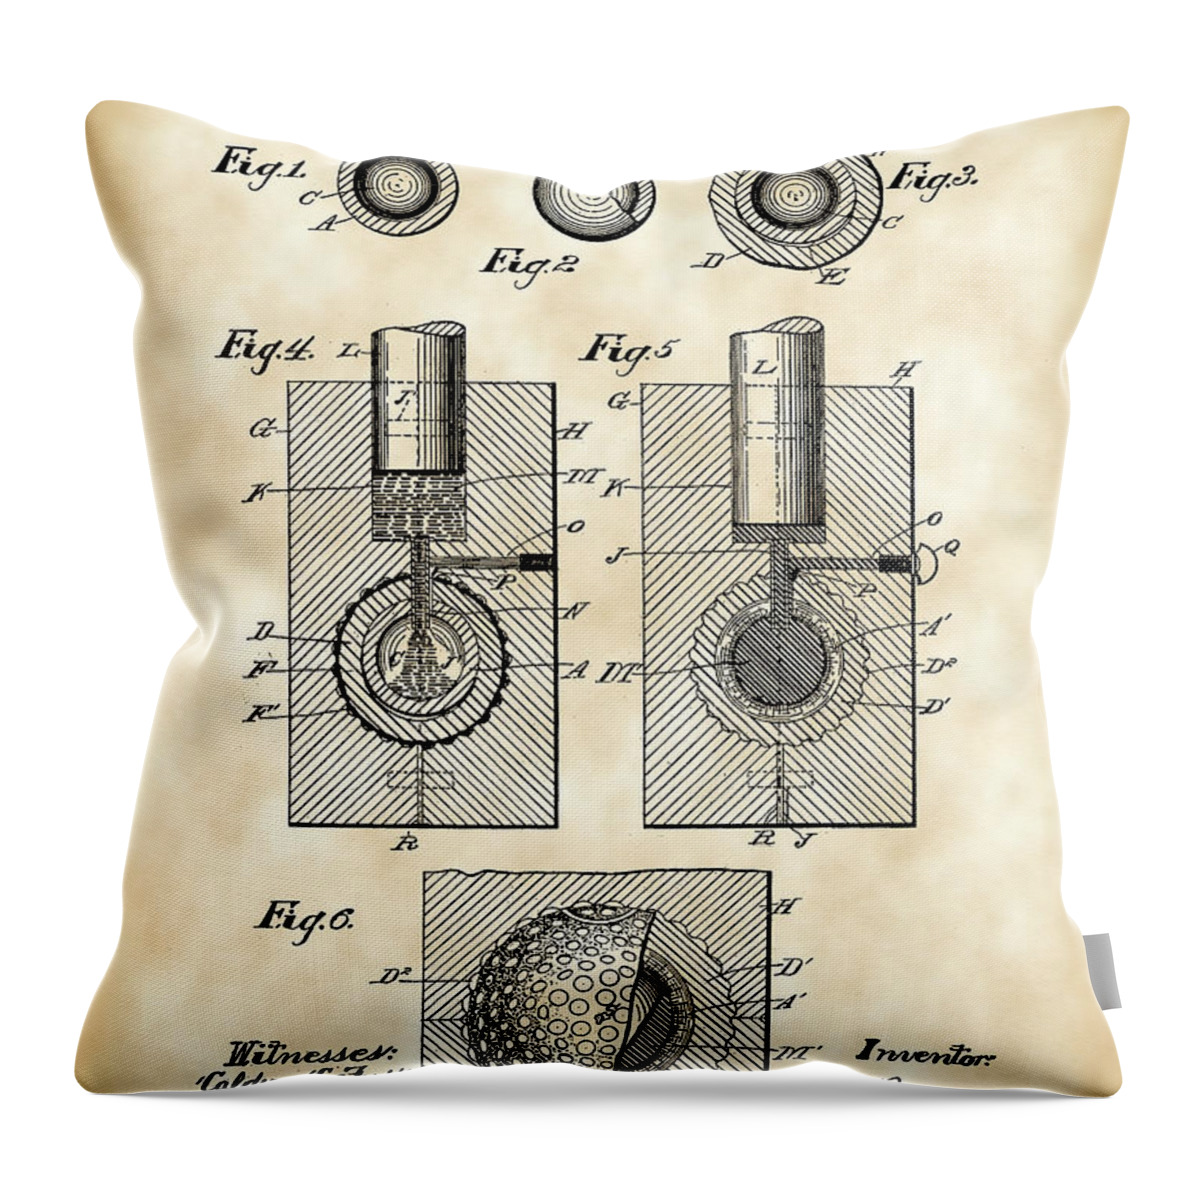 Patent Throw Pillow featuring the digital art Golf Ball Patent 1902 - Vintage by Stephen Younts